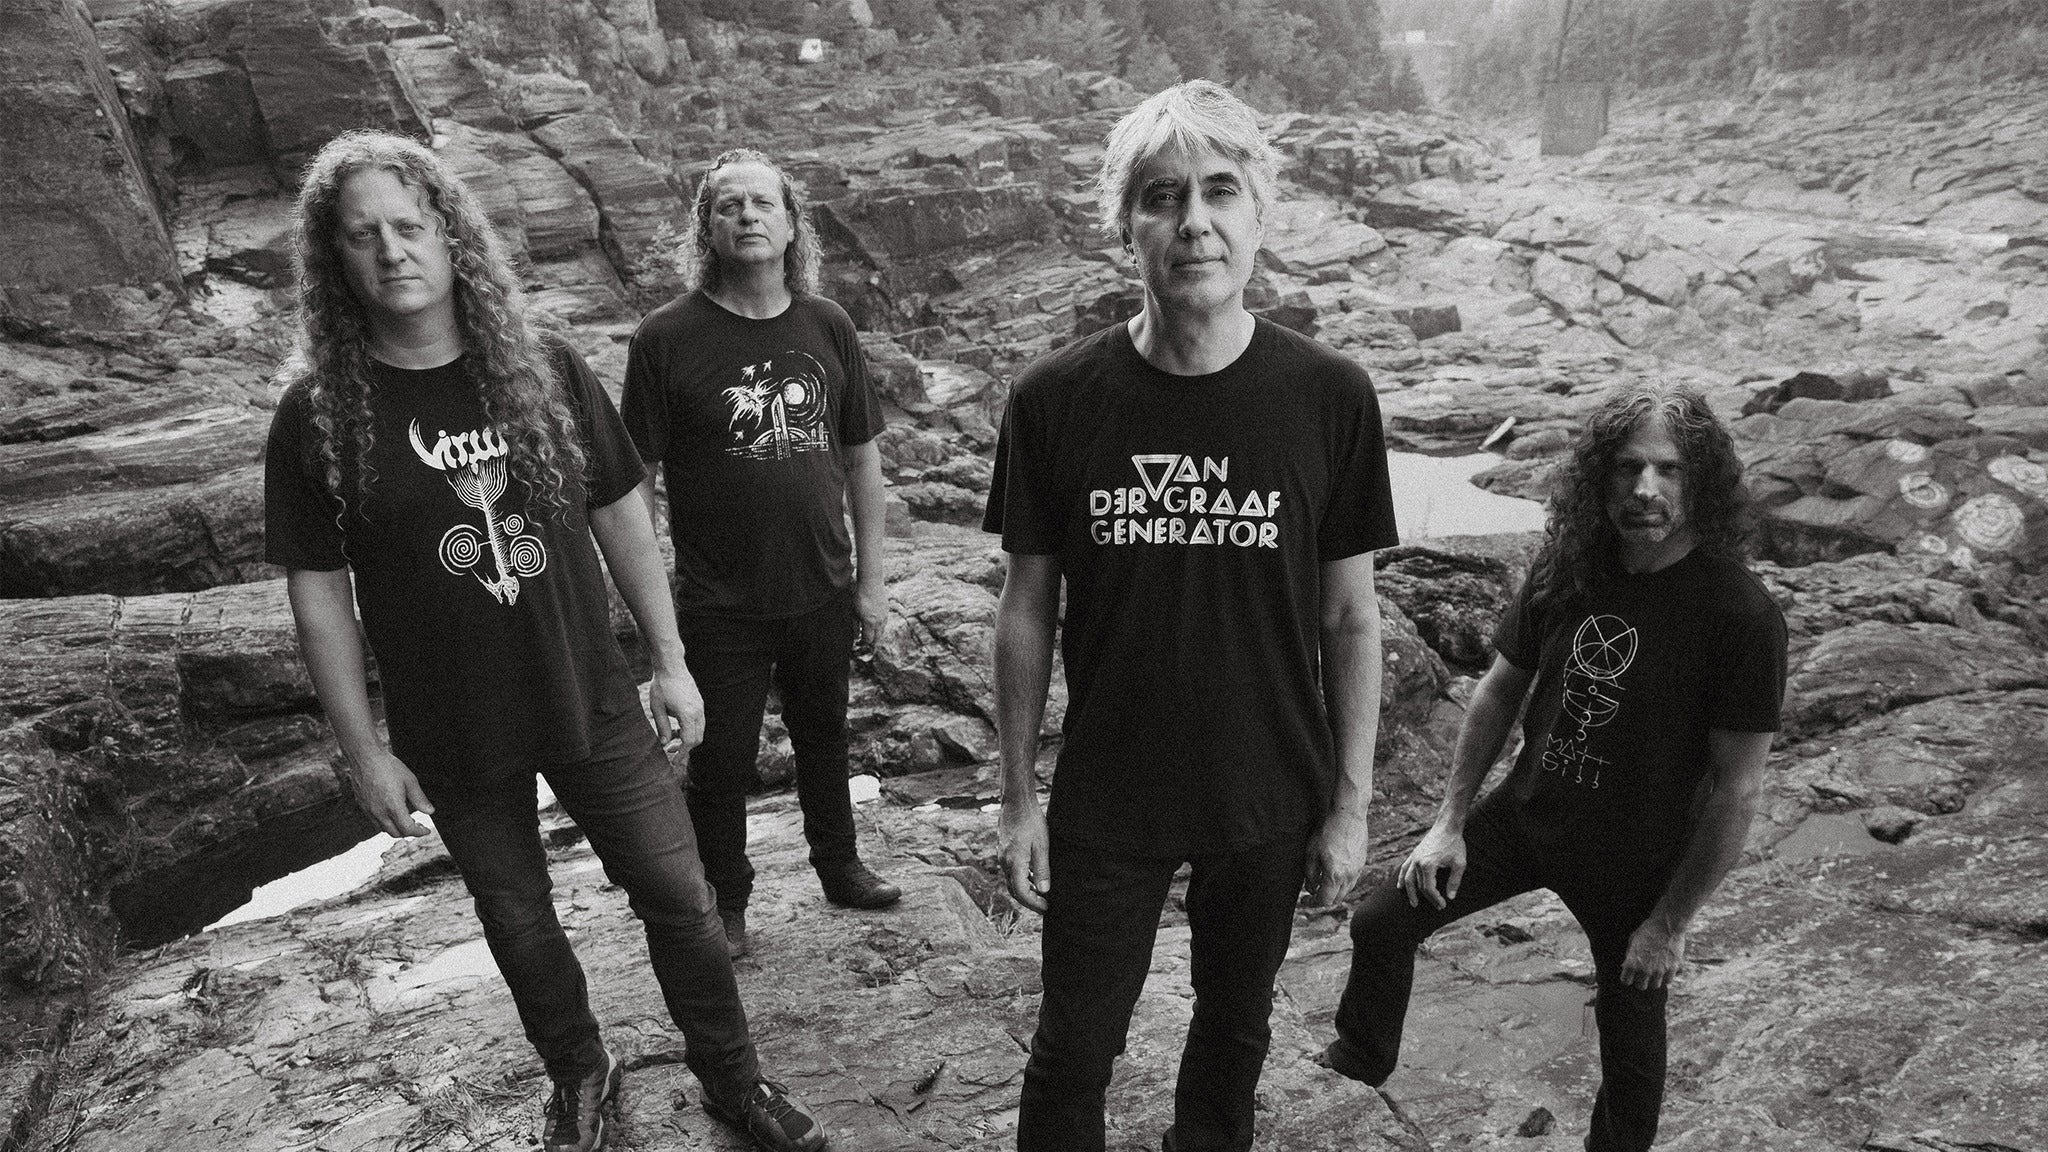 working presale code for Voivod advanced tickets in Asheville at The Orange Peel